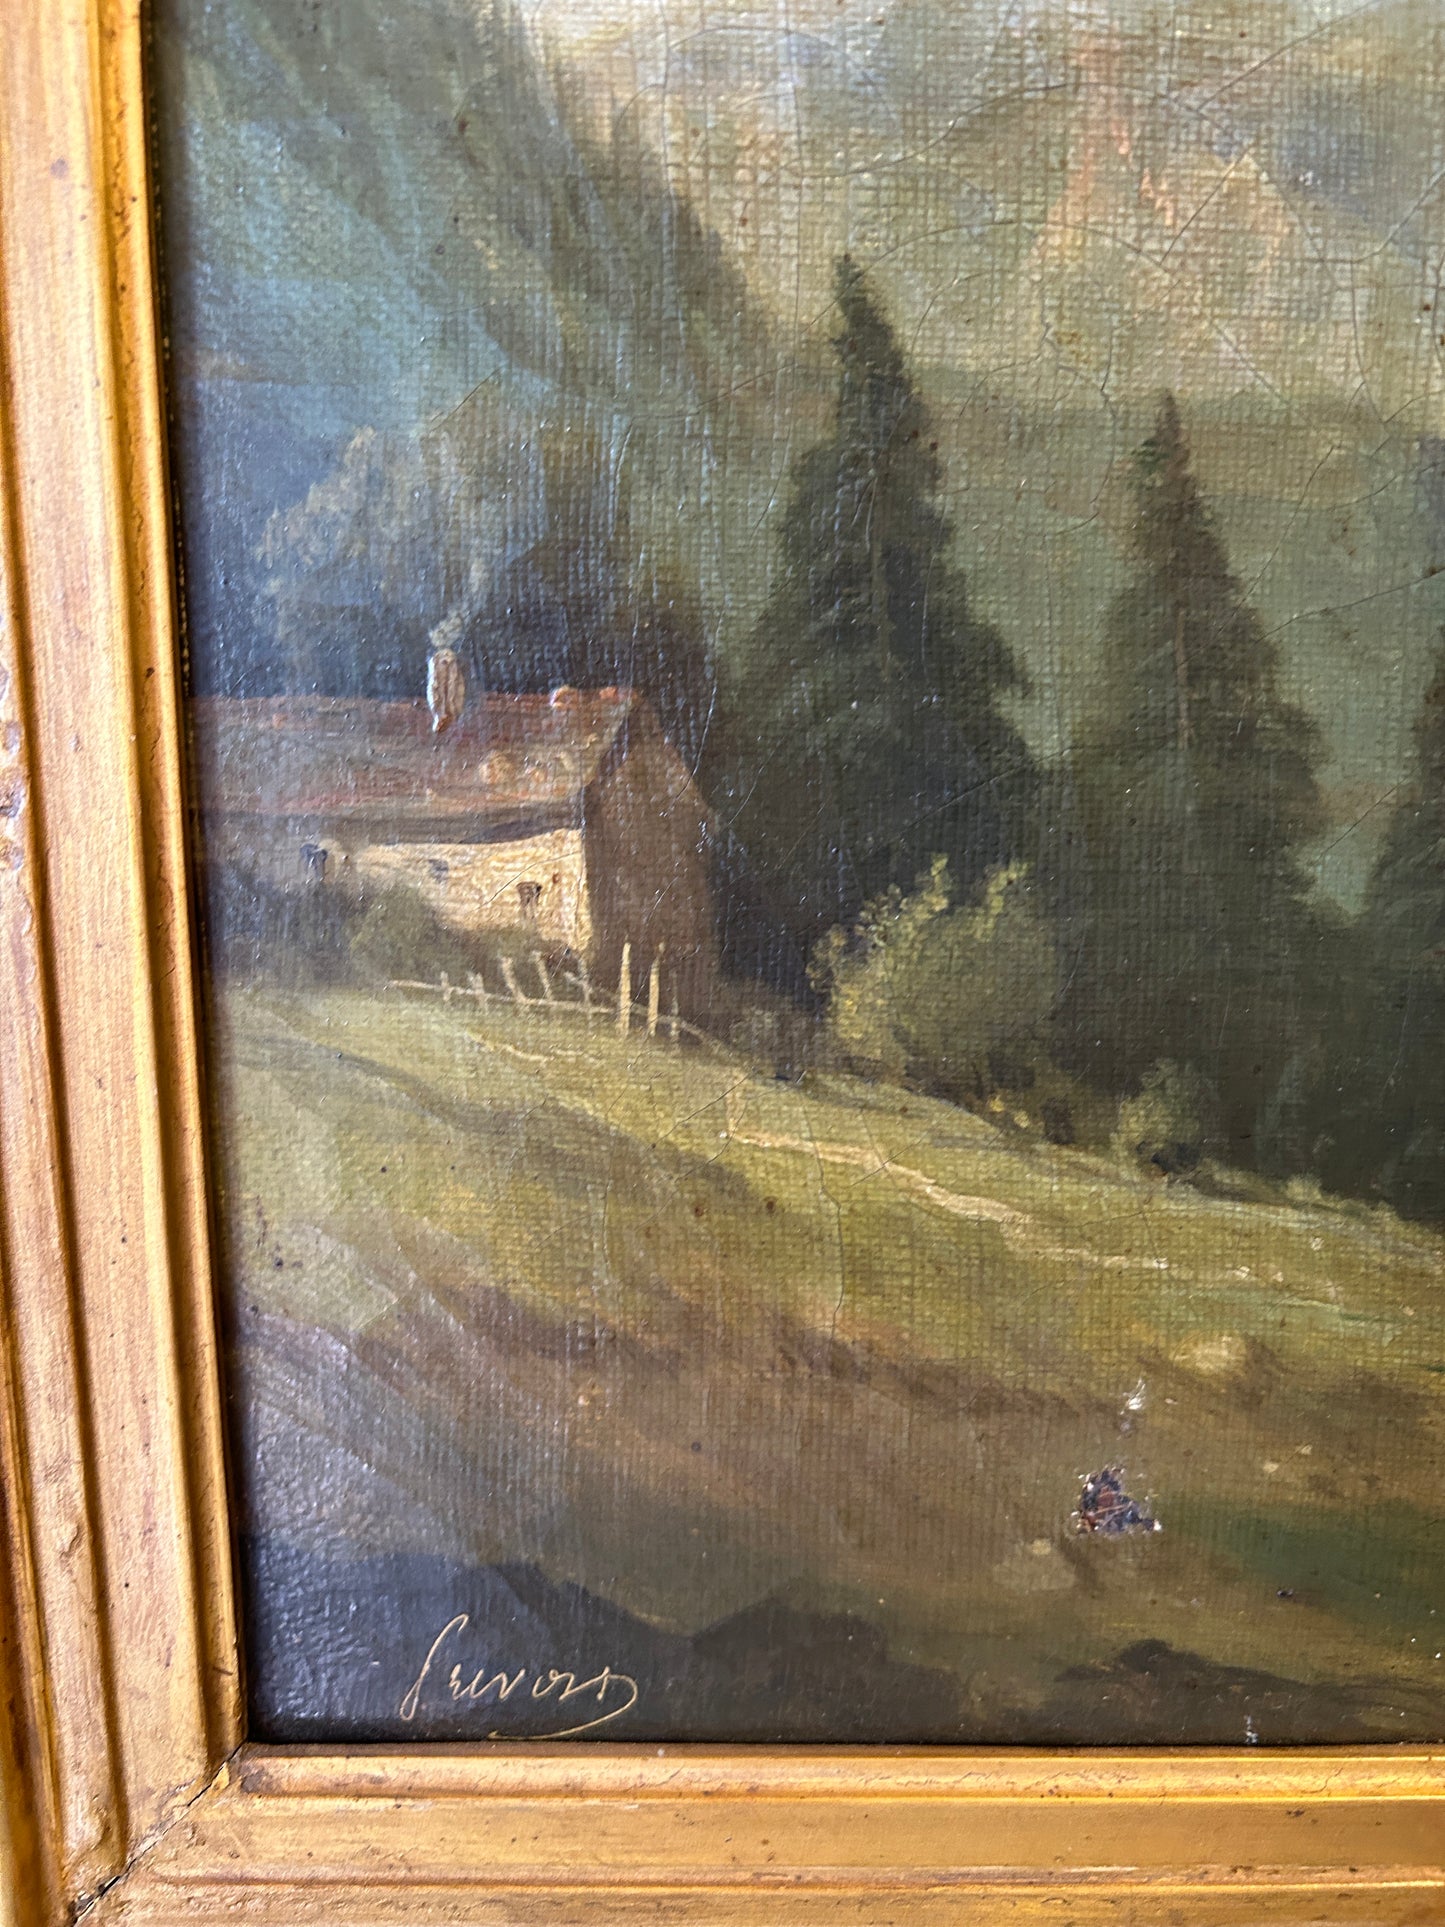 A Church in the Dolomites Italian Oil on Canvas Mid 19th Century